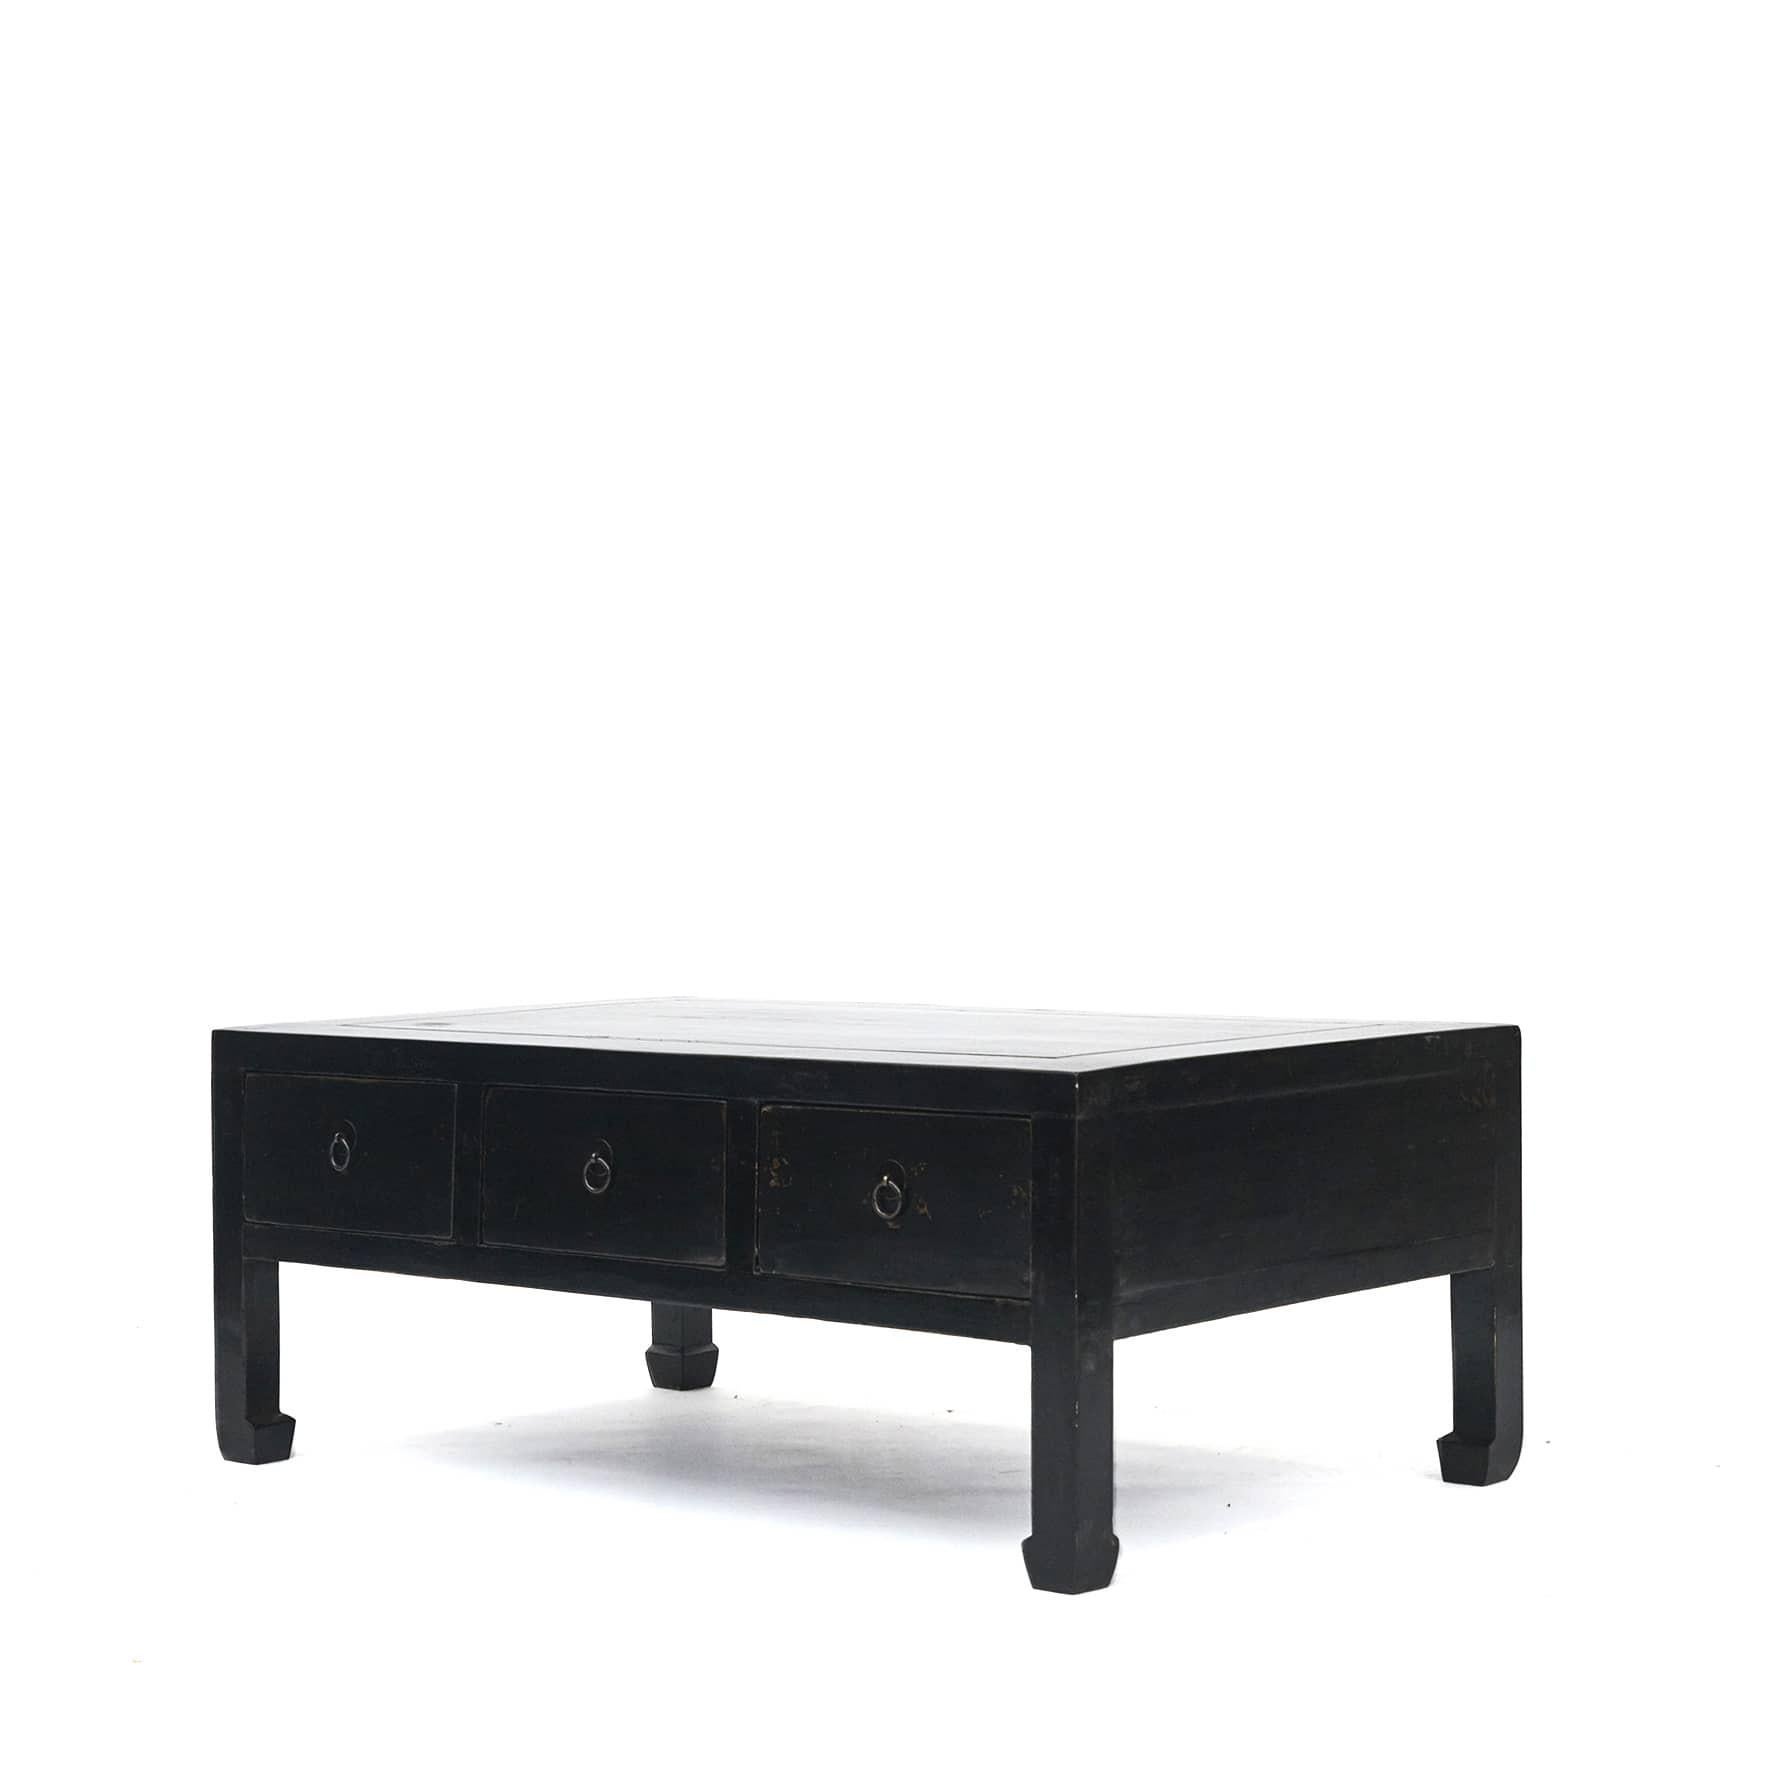 Art deco coffee table in Linden wood and lacquer
Original black lacquer with natural patina.
Three drawers on one side.

Clear lacquer surface finish.
Hebei Province, China 1910 - 1920.